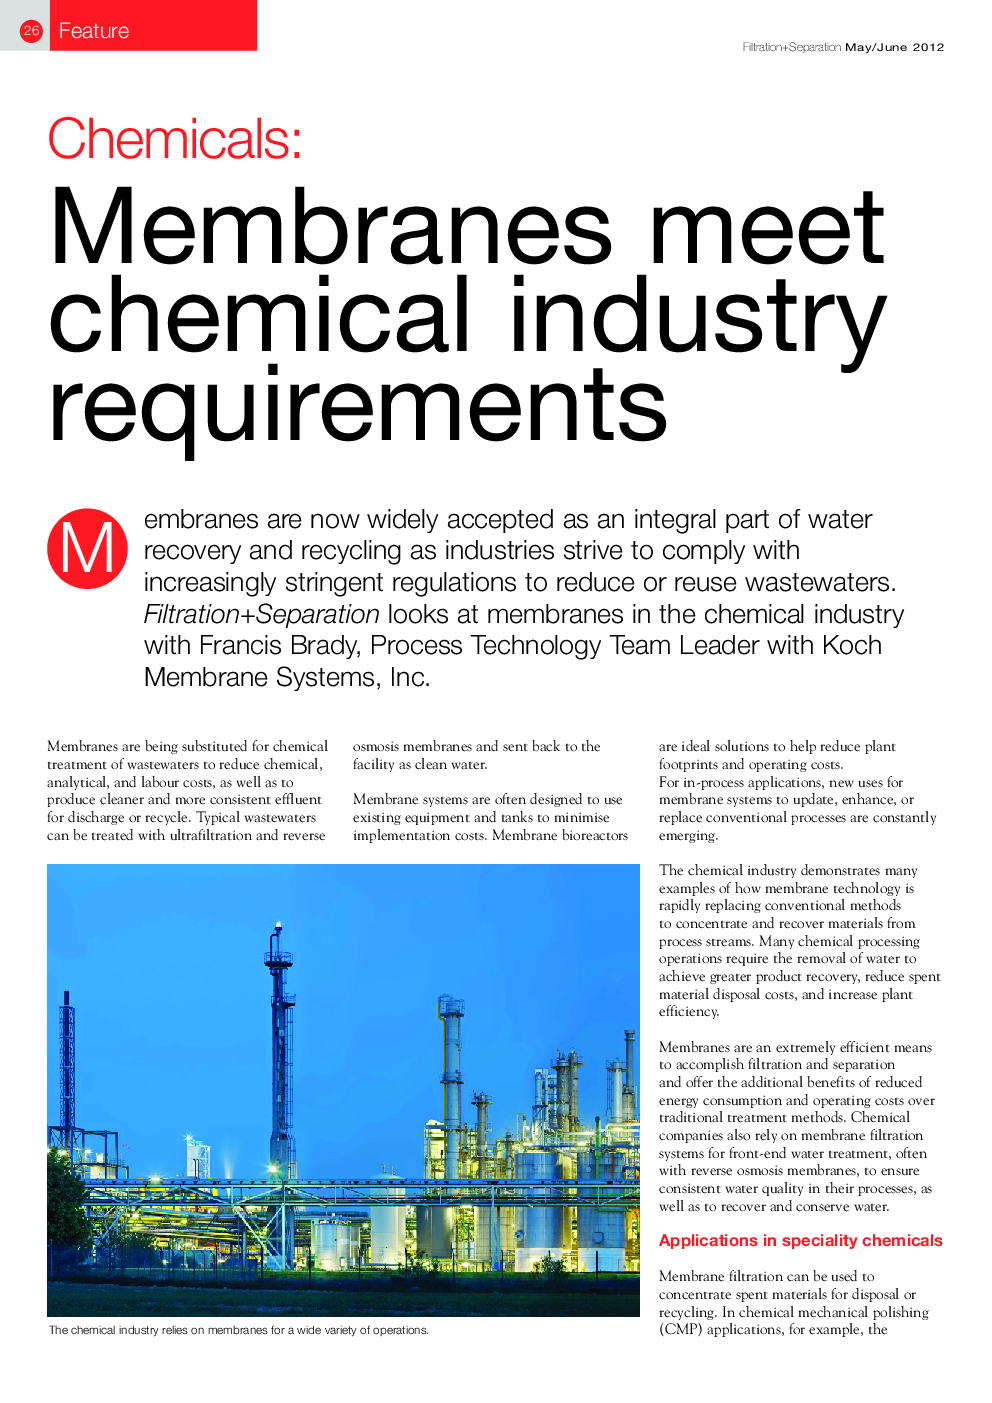 Chemicals: Membranes meet chemical industry requirements